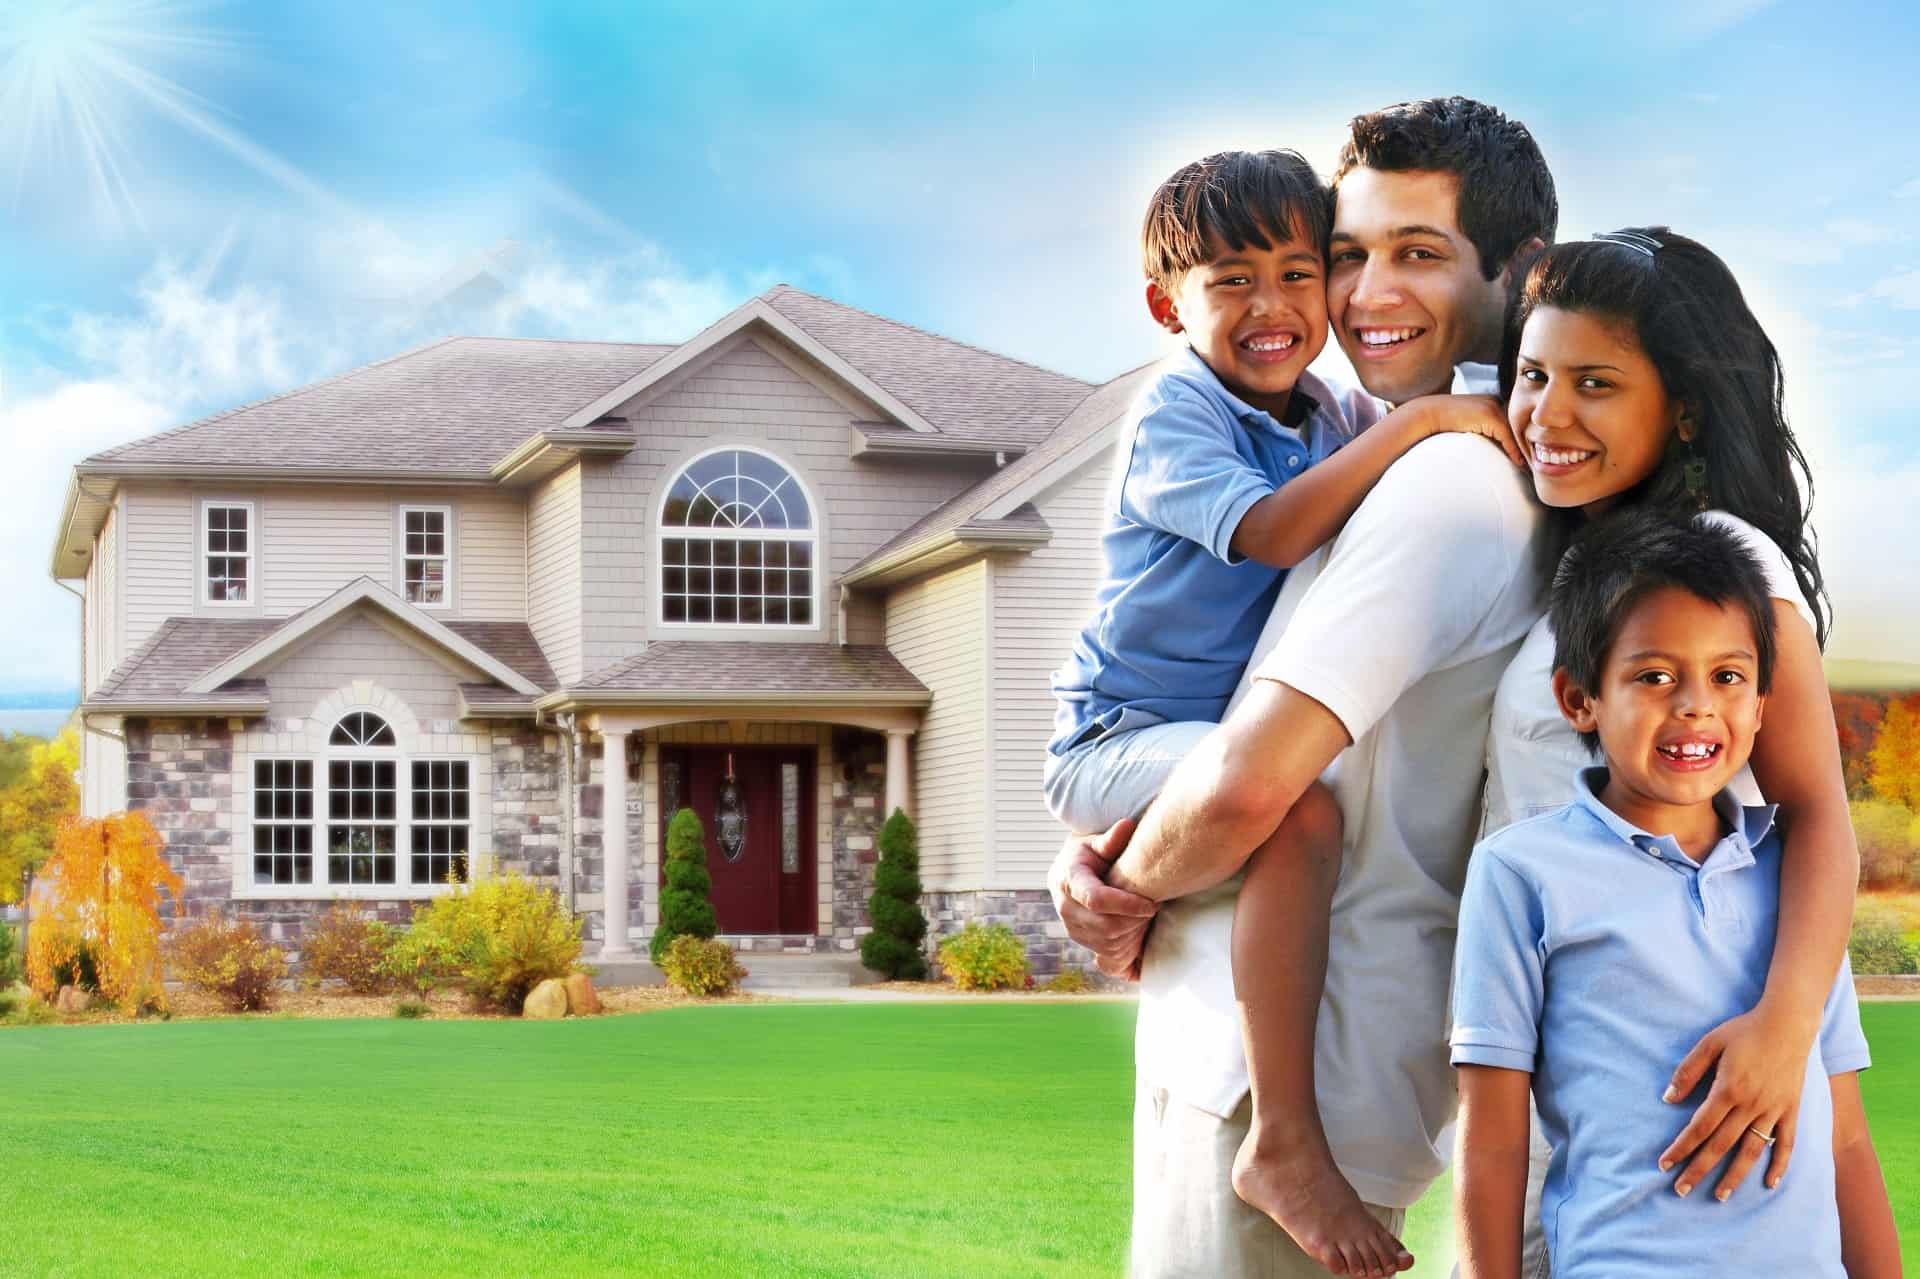 Affordable homes for sale in Fort Worth TX with a family standing in front of a house.